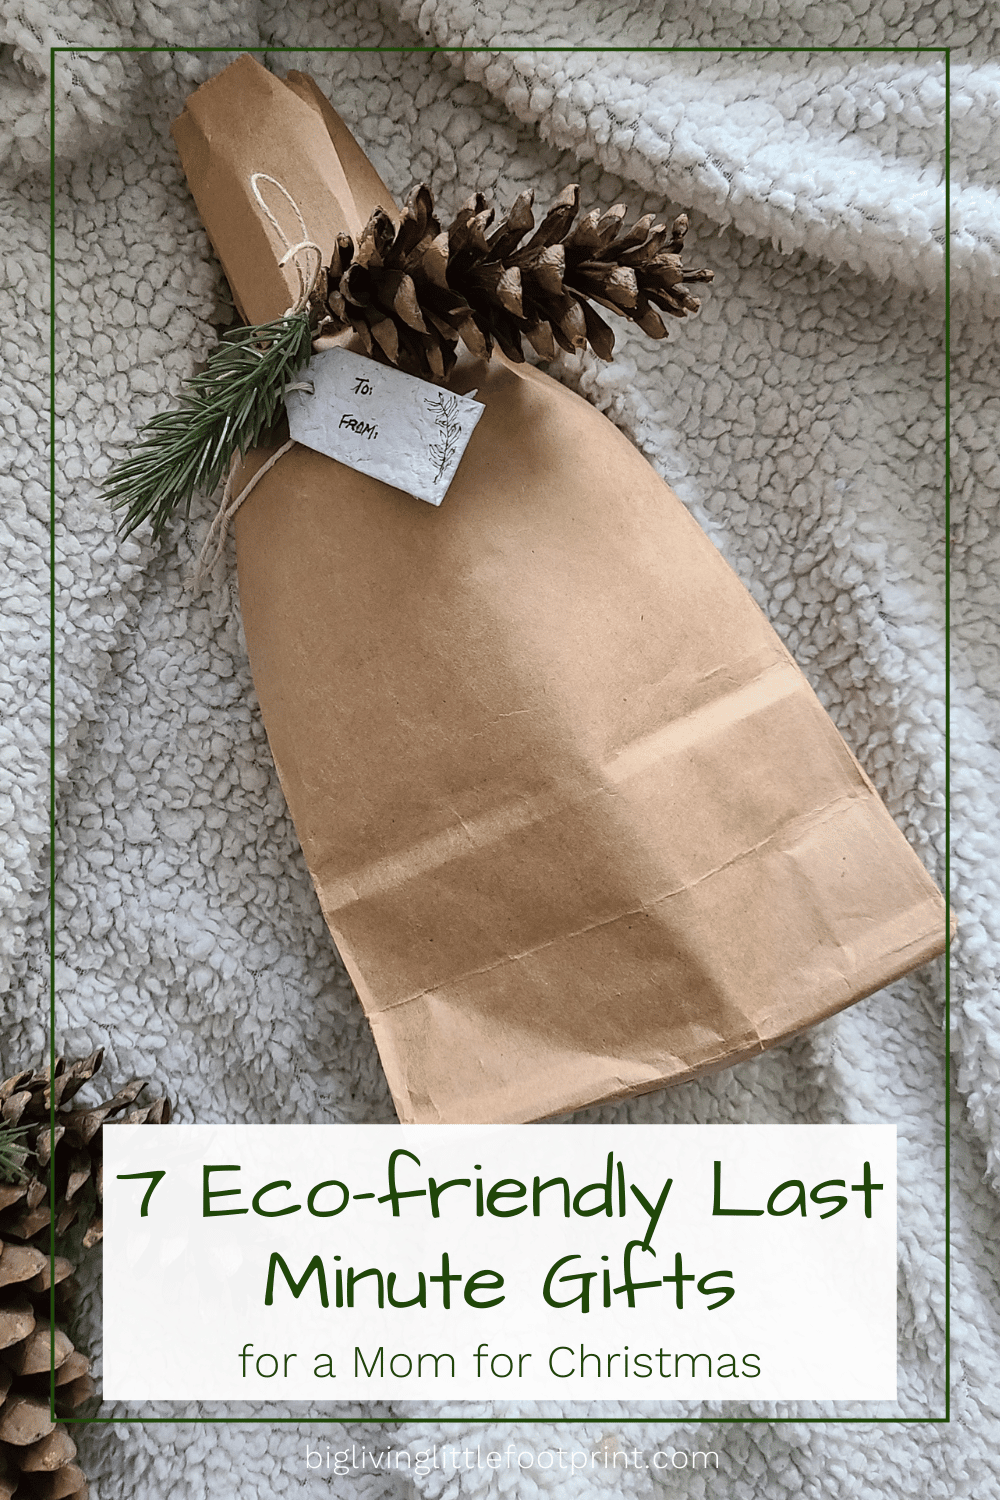 7 Eco-friendly Last Minute Gifts for a Mom for Christmas - Big Living